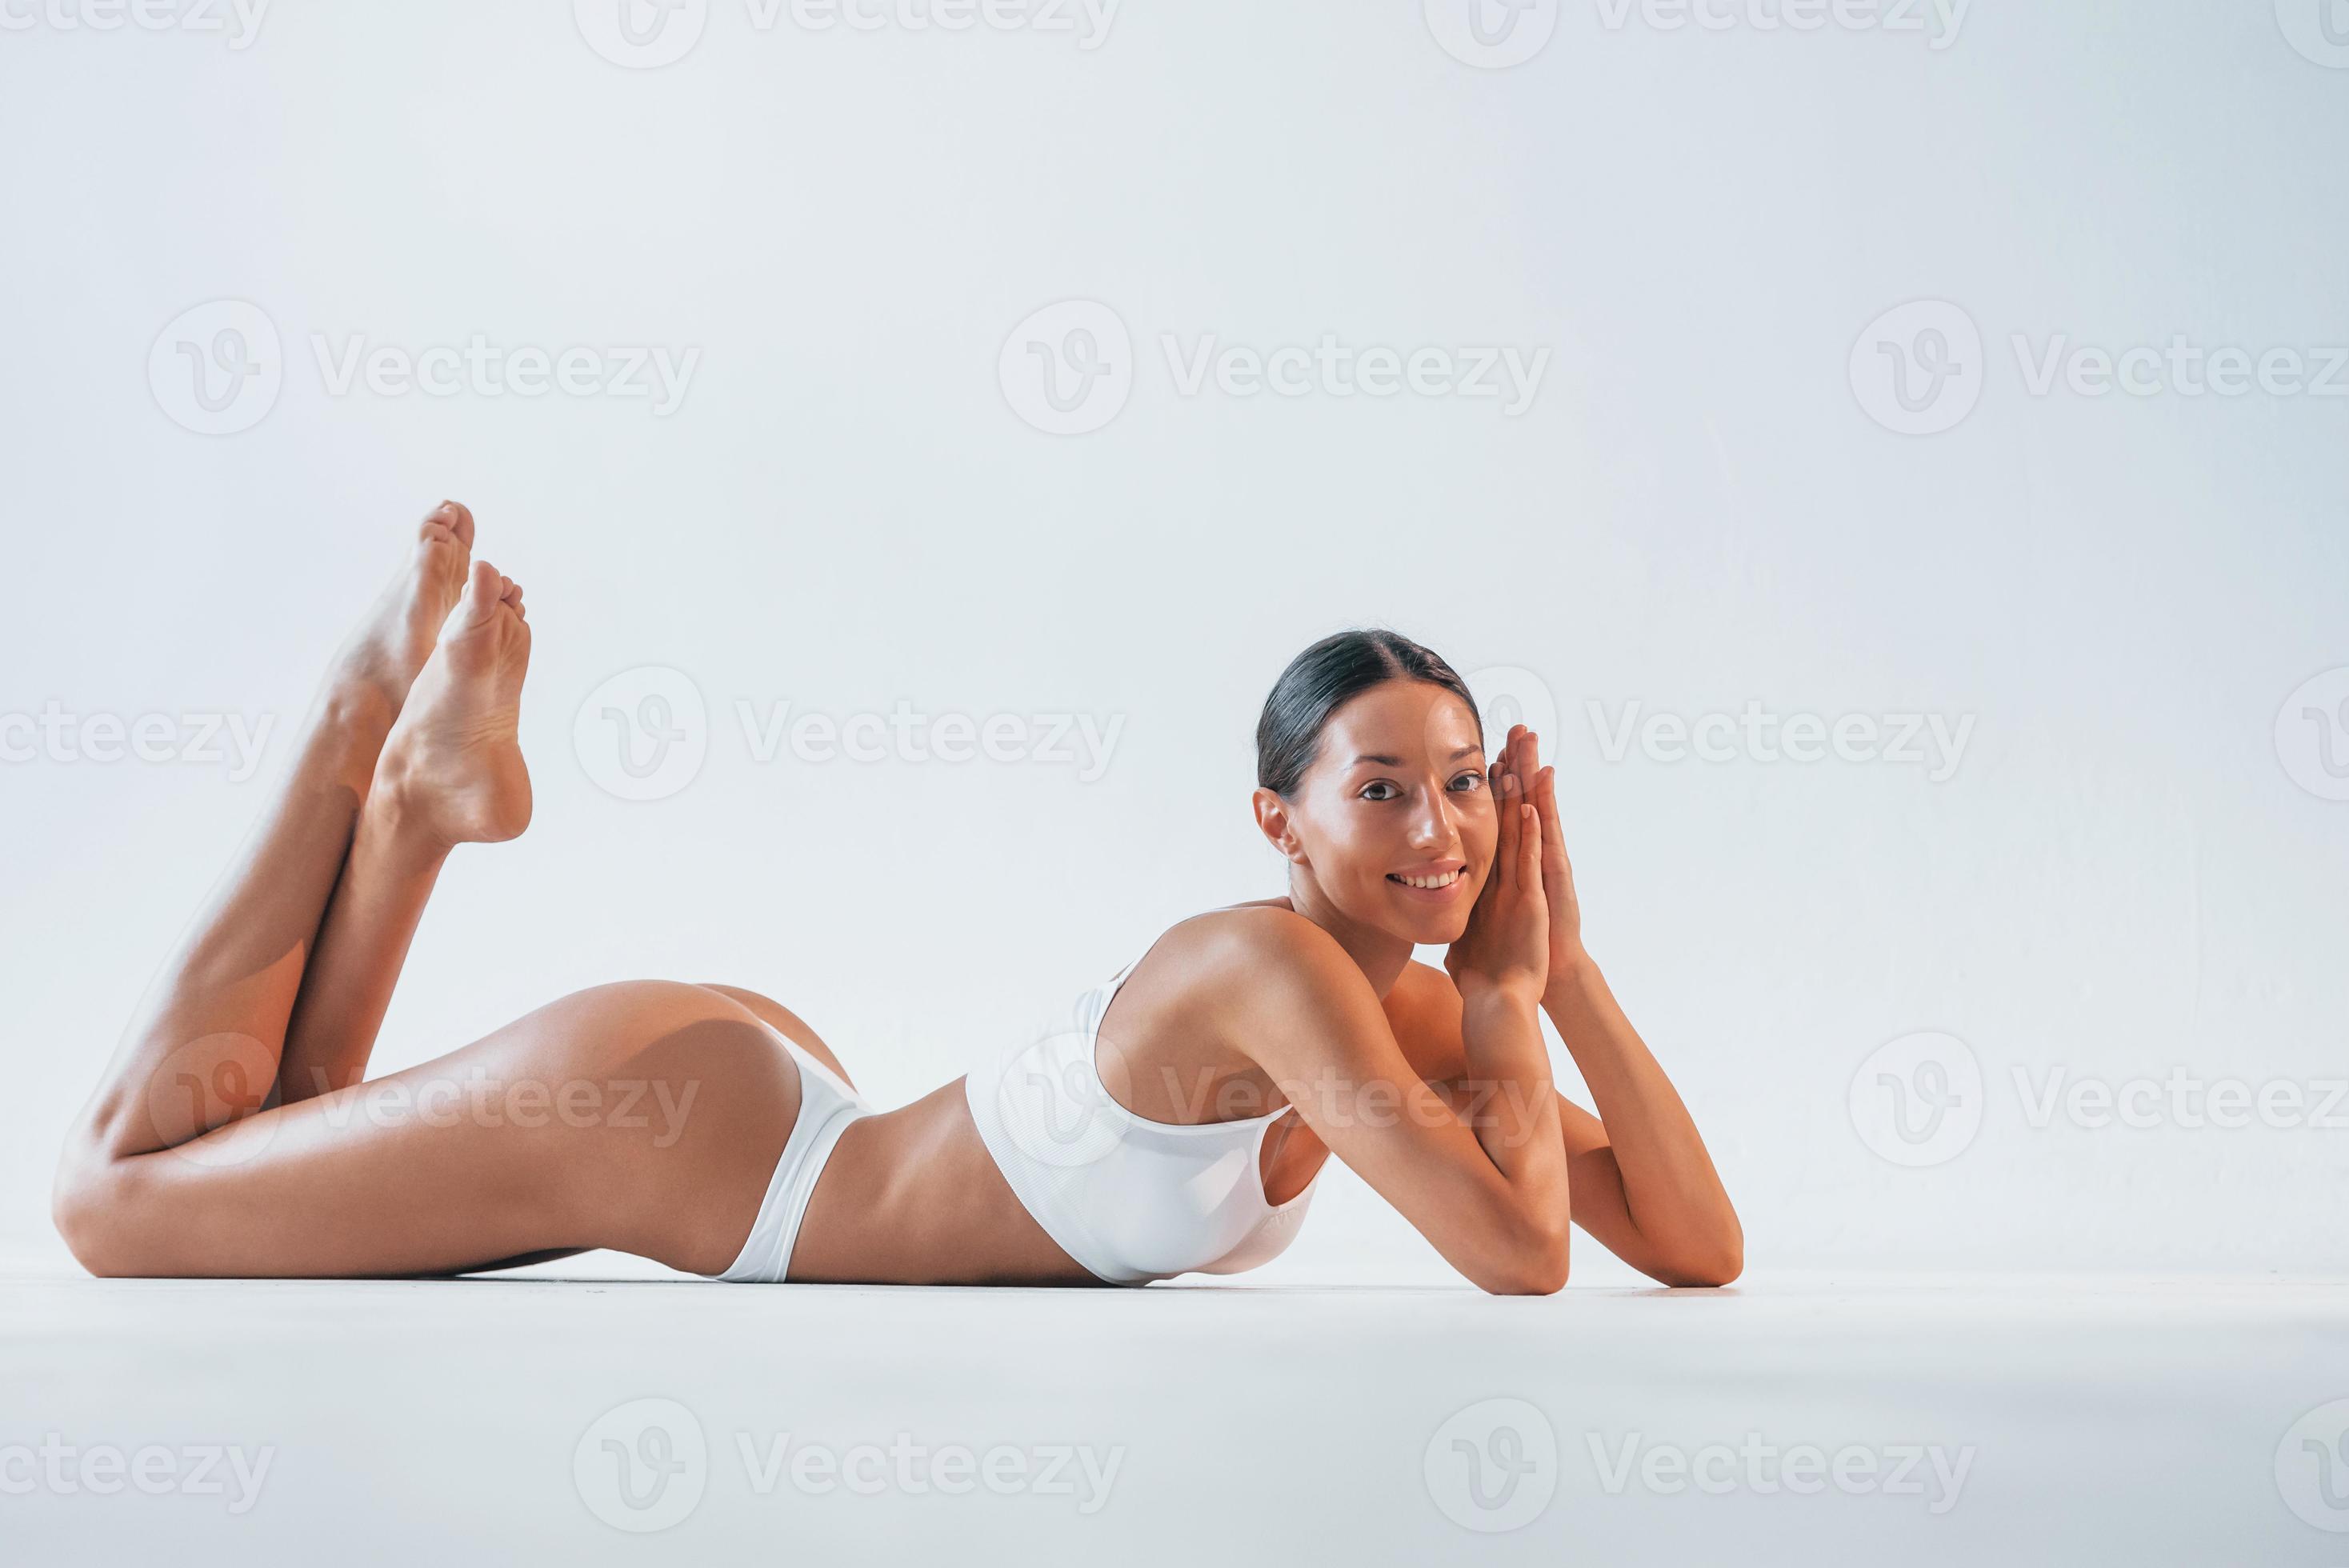 Lace Underwear on Sexy Female Body That Lies on Floor at Home, Lifestyle  Stock Footage ft. abdomen & female - Envato Elements